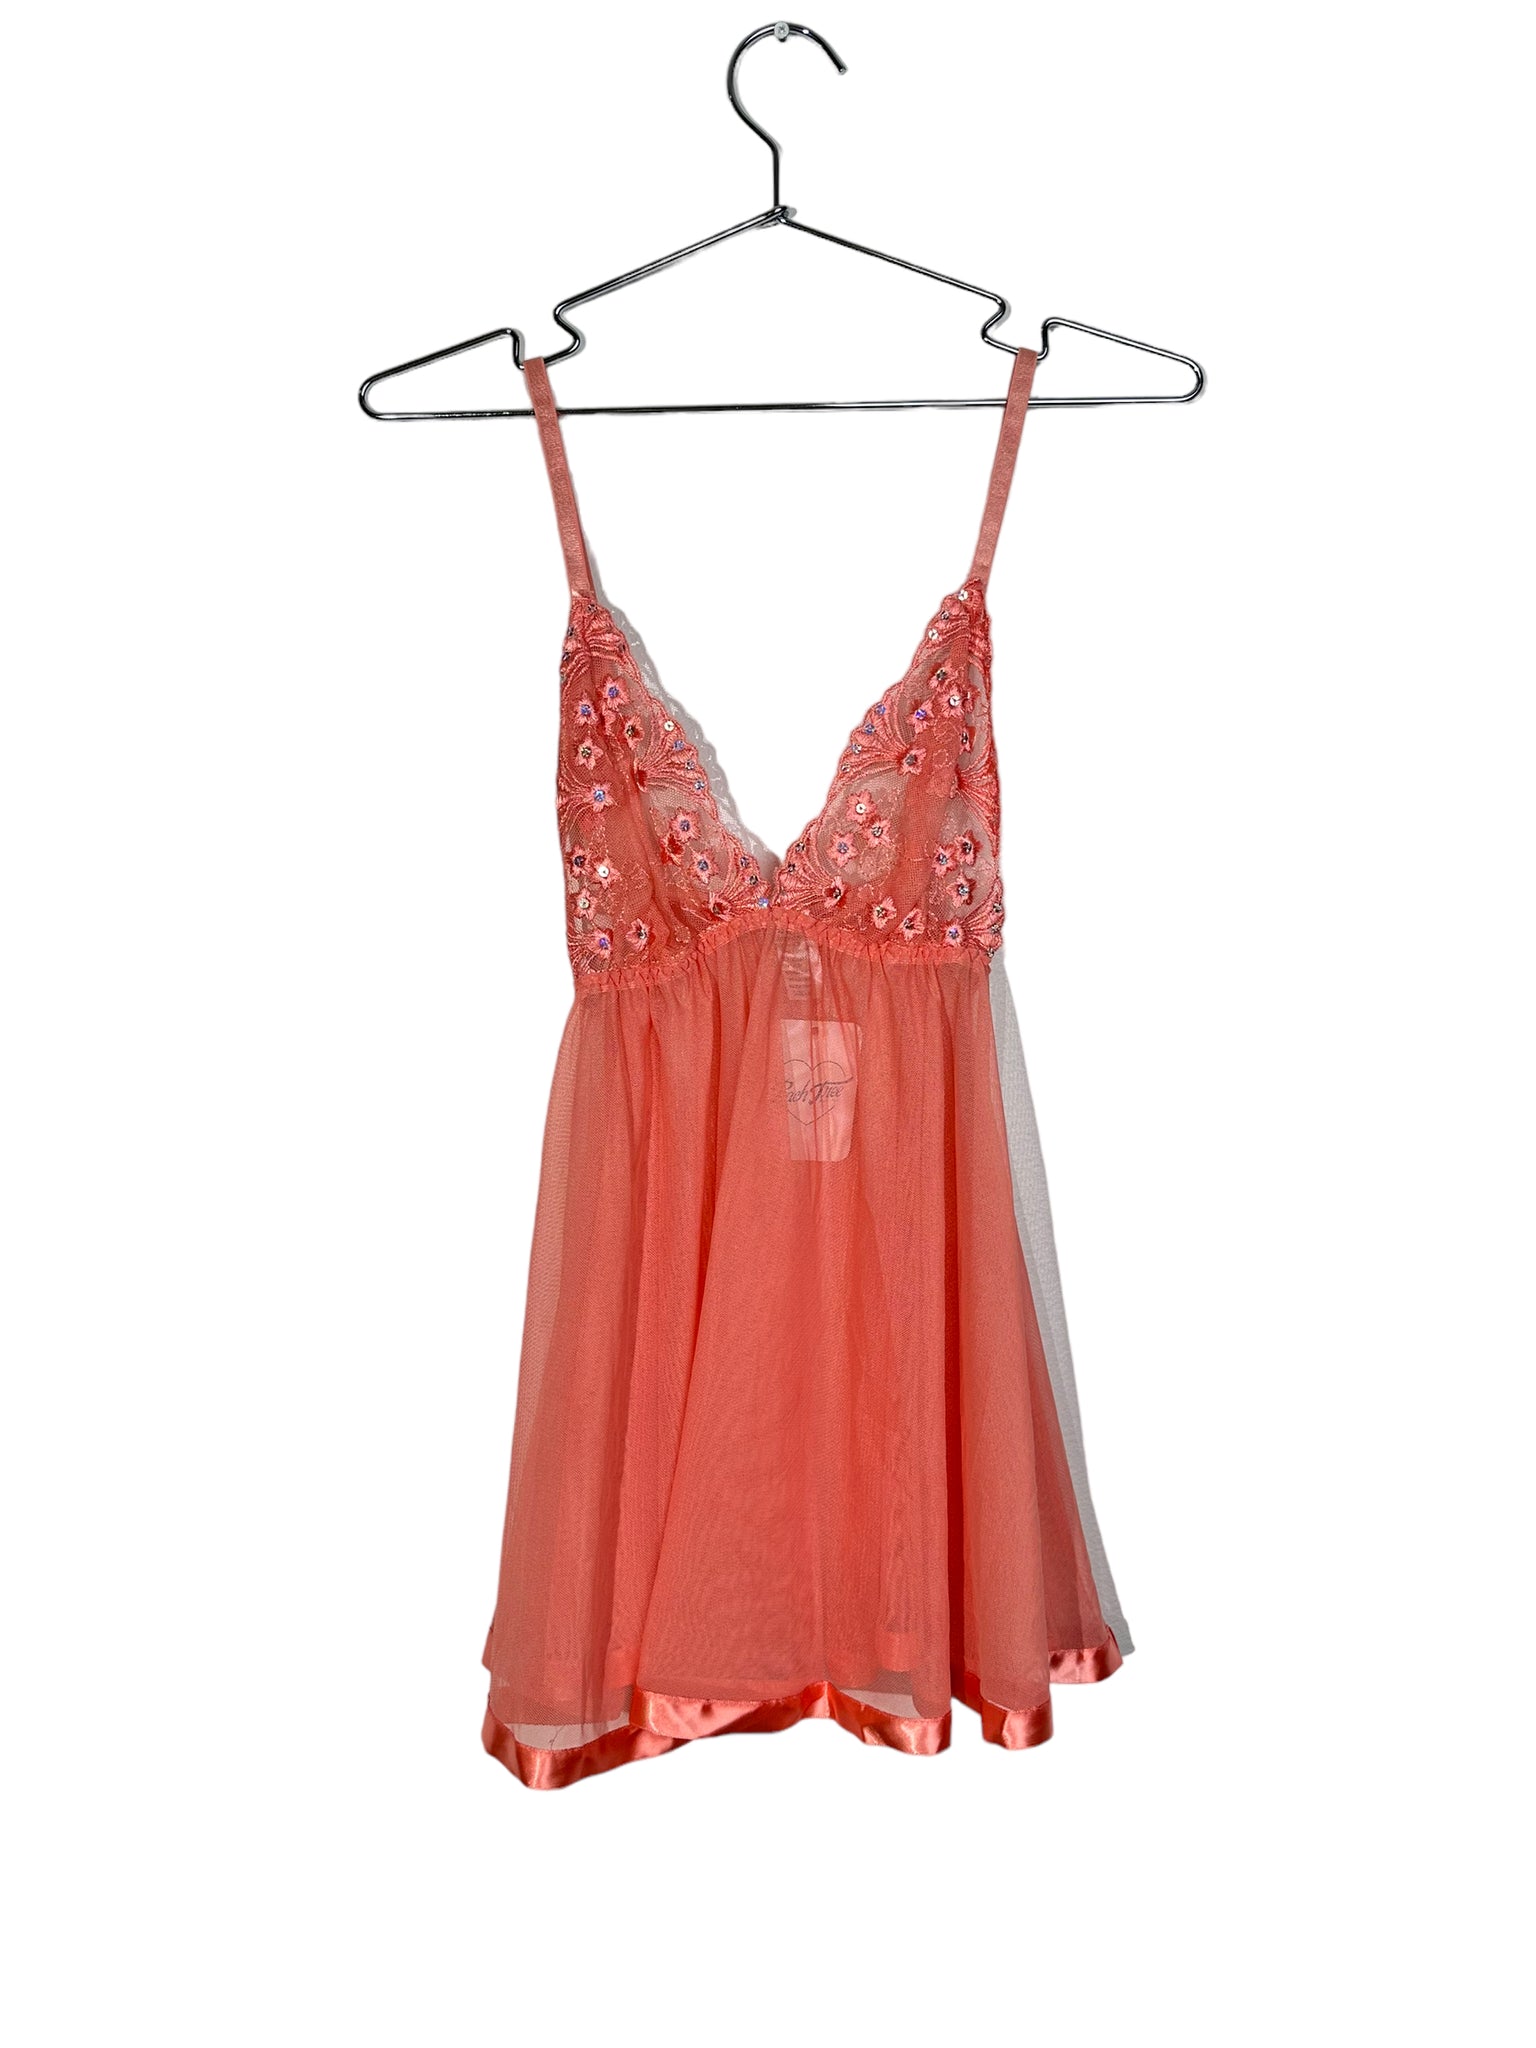 Peachy Pink Floral Lingeire Top